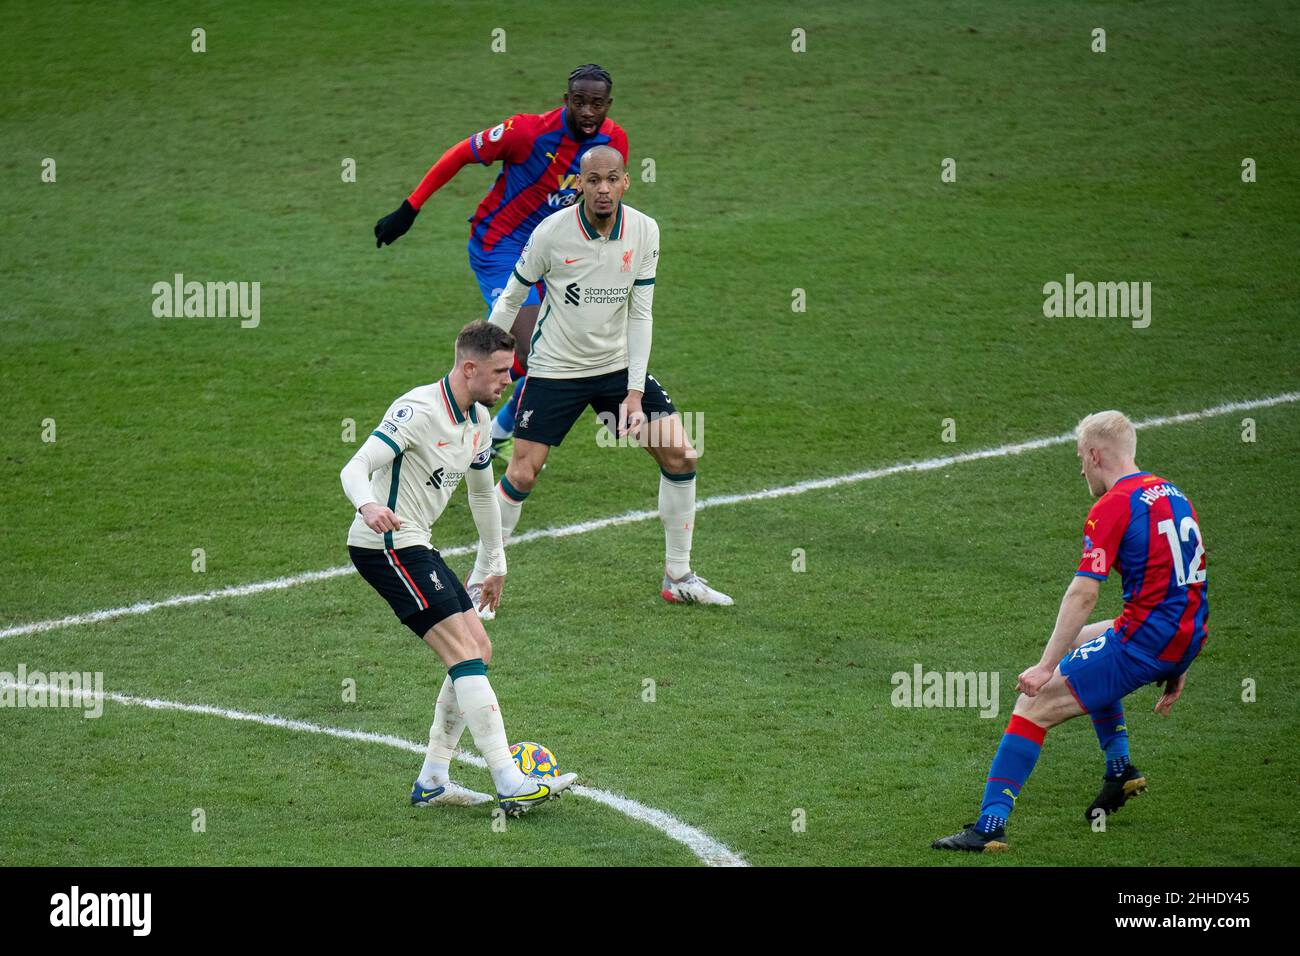 LONDON, ENGLAND - JANUARY 23: Jordan Henderson, Fabinho, Will Hughes during the Premier League match between Crystal Palace and Liverpool at Selhurst Stock Photo